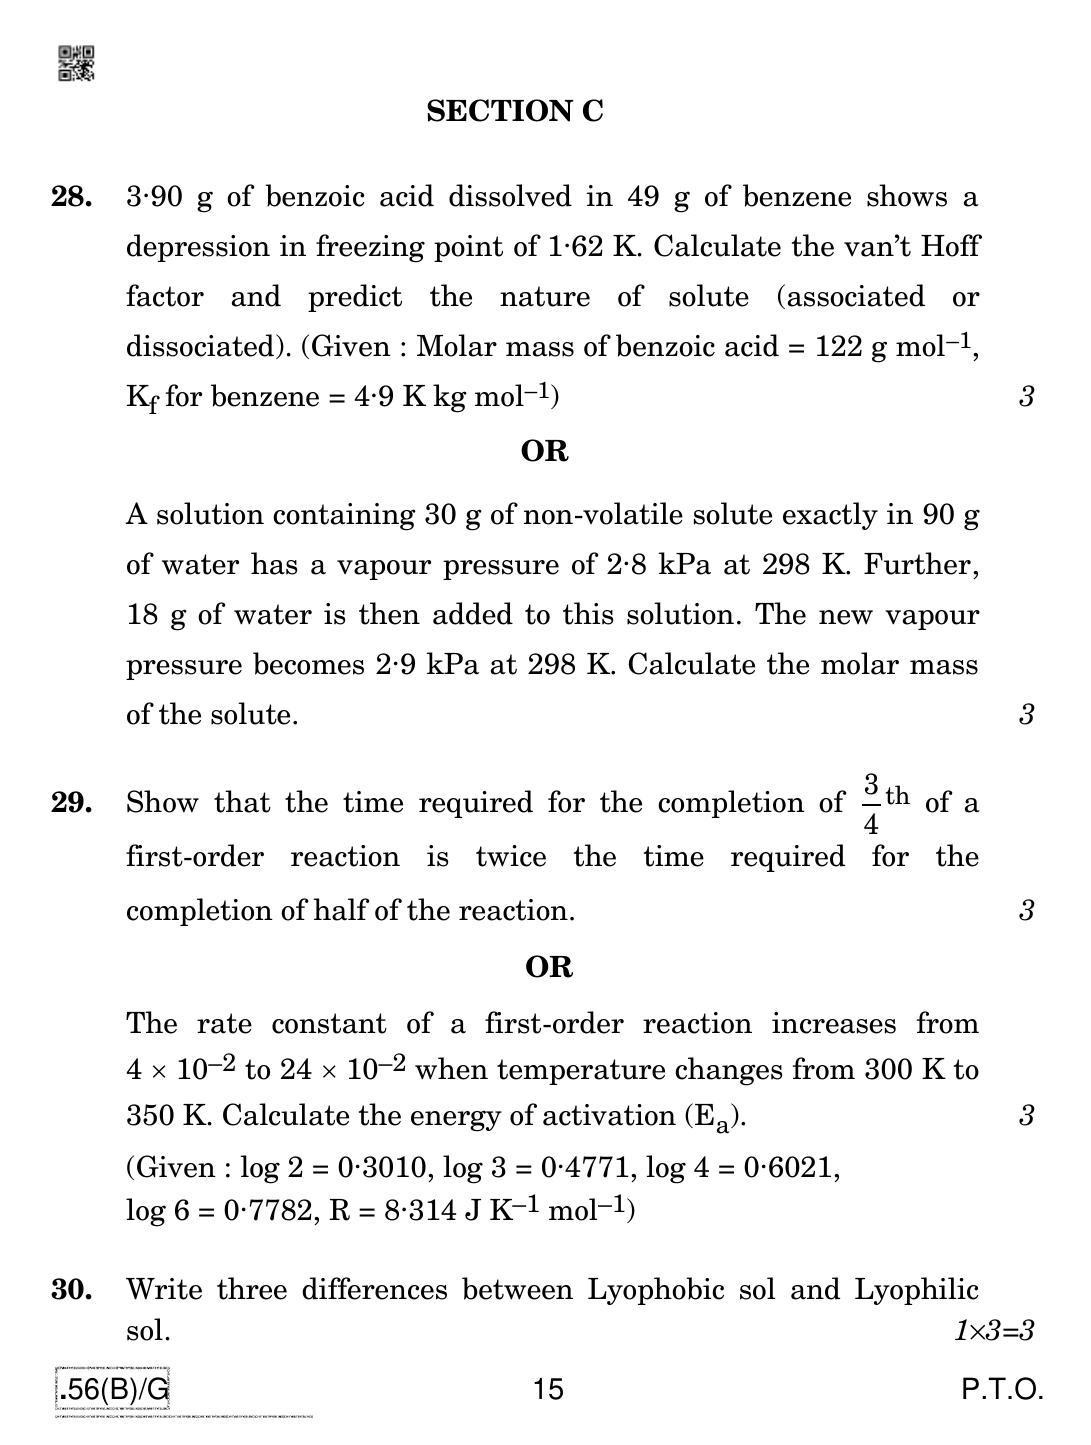 CBSE Class 12 56(B)-C - Chemistry For Blind Candidates 2020 Compartment Question Paper - Page 15